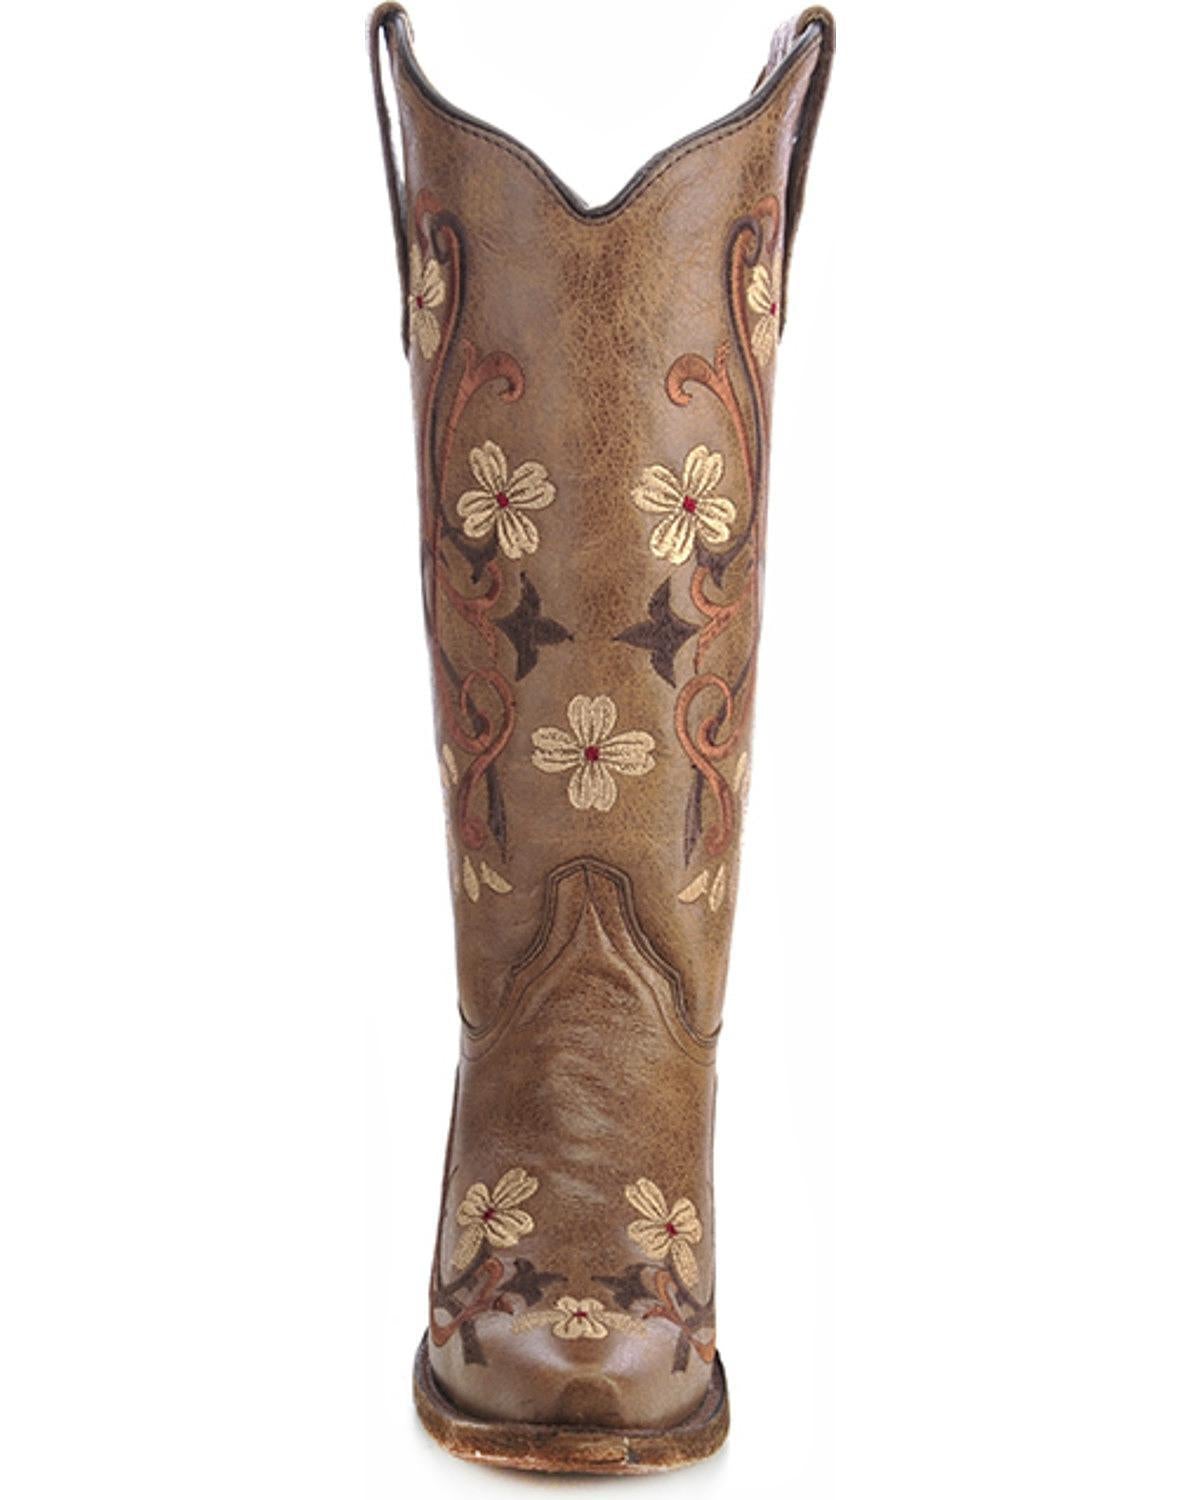 L5176 Circle G Women's Floral Embroidery Brown Snip Toe Boot